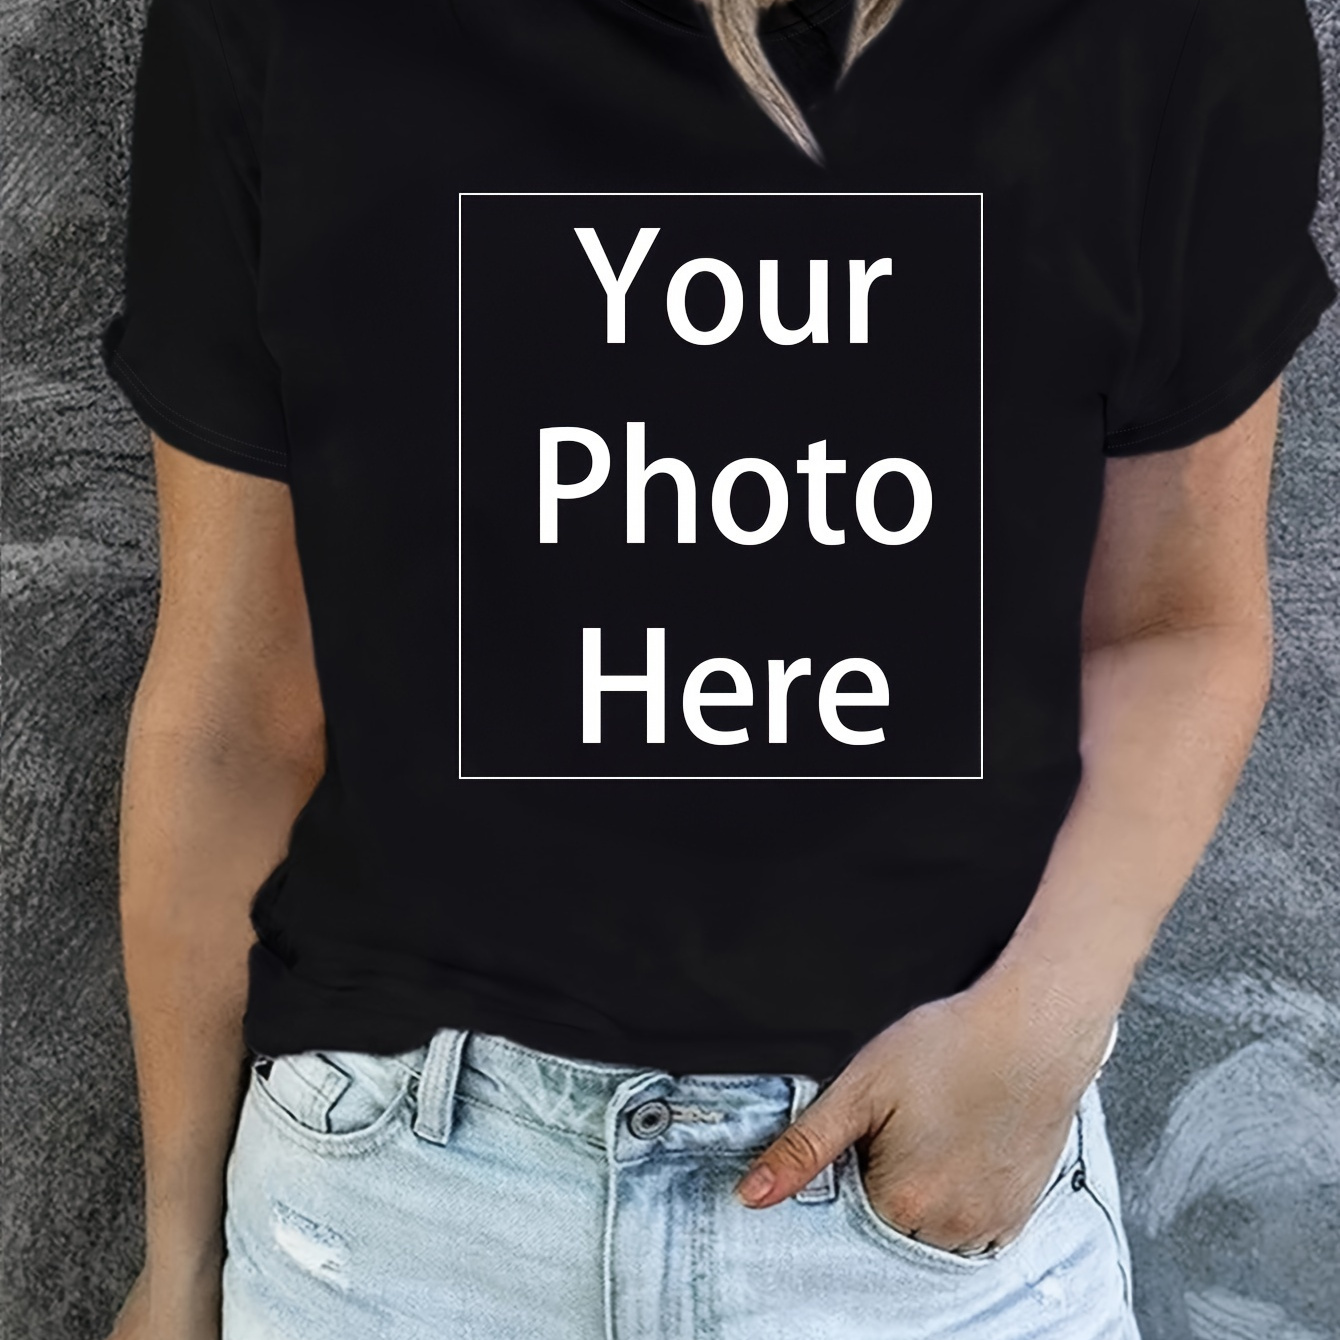 

Your Photo Here Print T-shirt, Customized Merchandise Short Sleeve Crew Neck Casual Top For Summer & Spring, Women's Clothing